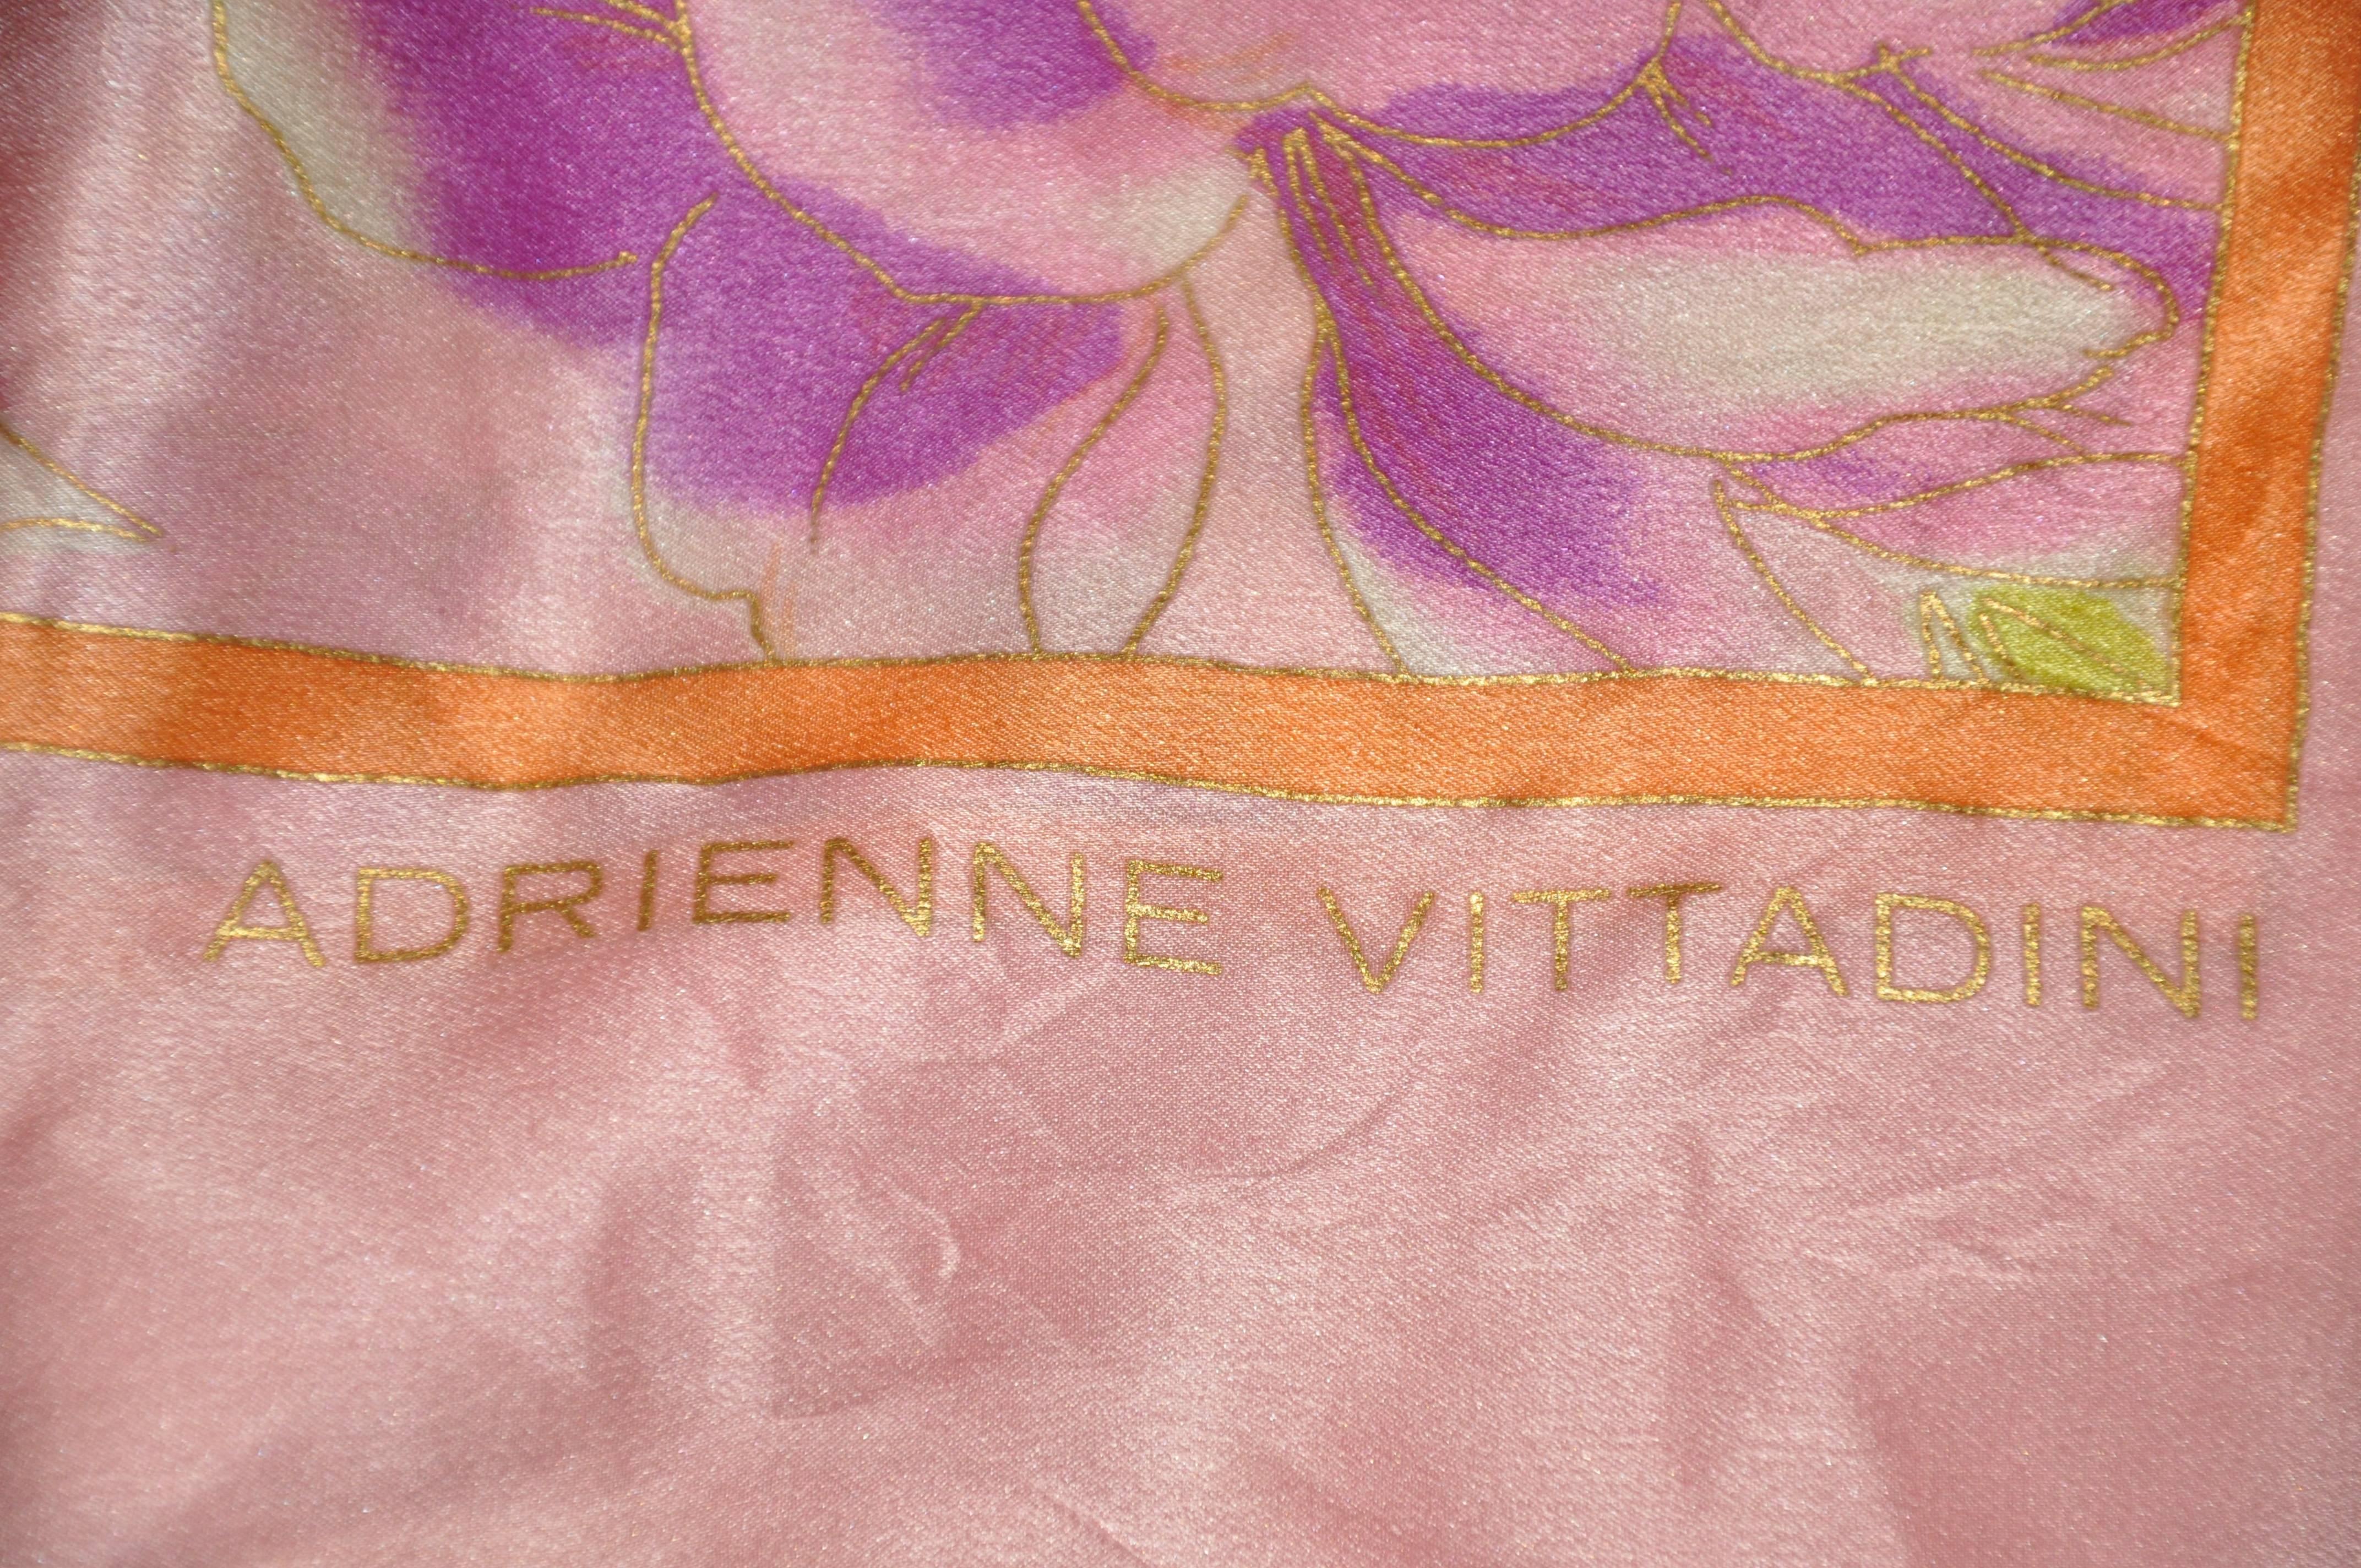 Adrienne Vittadini Multi Color Floral Silk Scarf In Good Condition For Sale In New York, NY